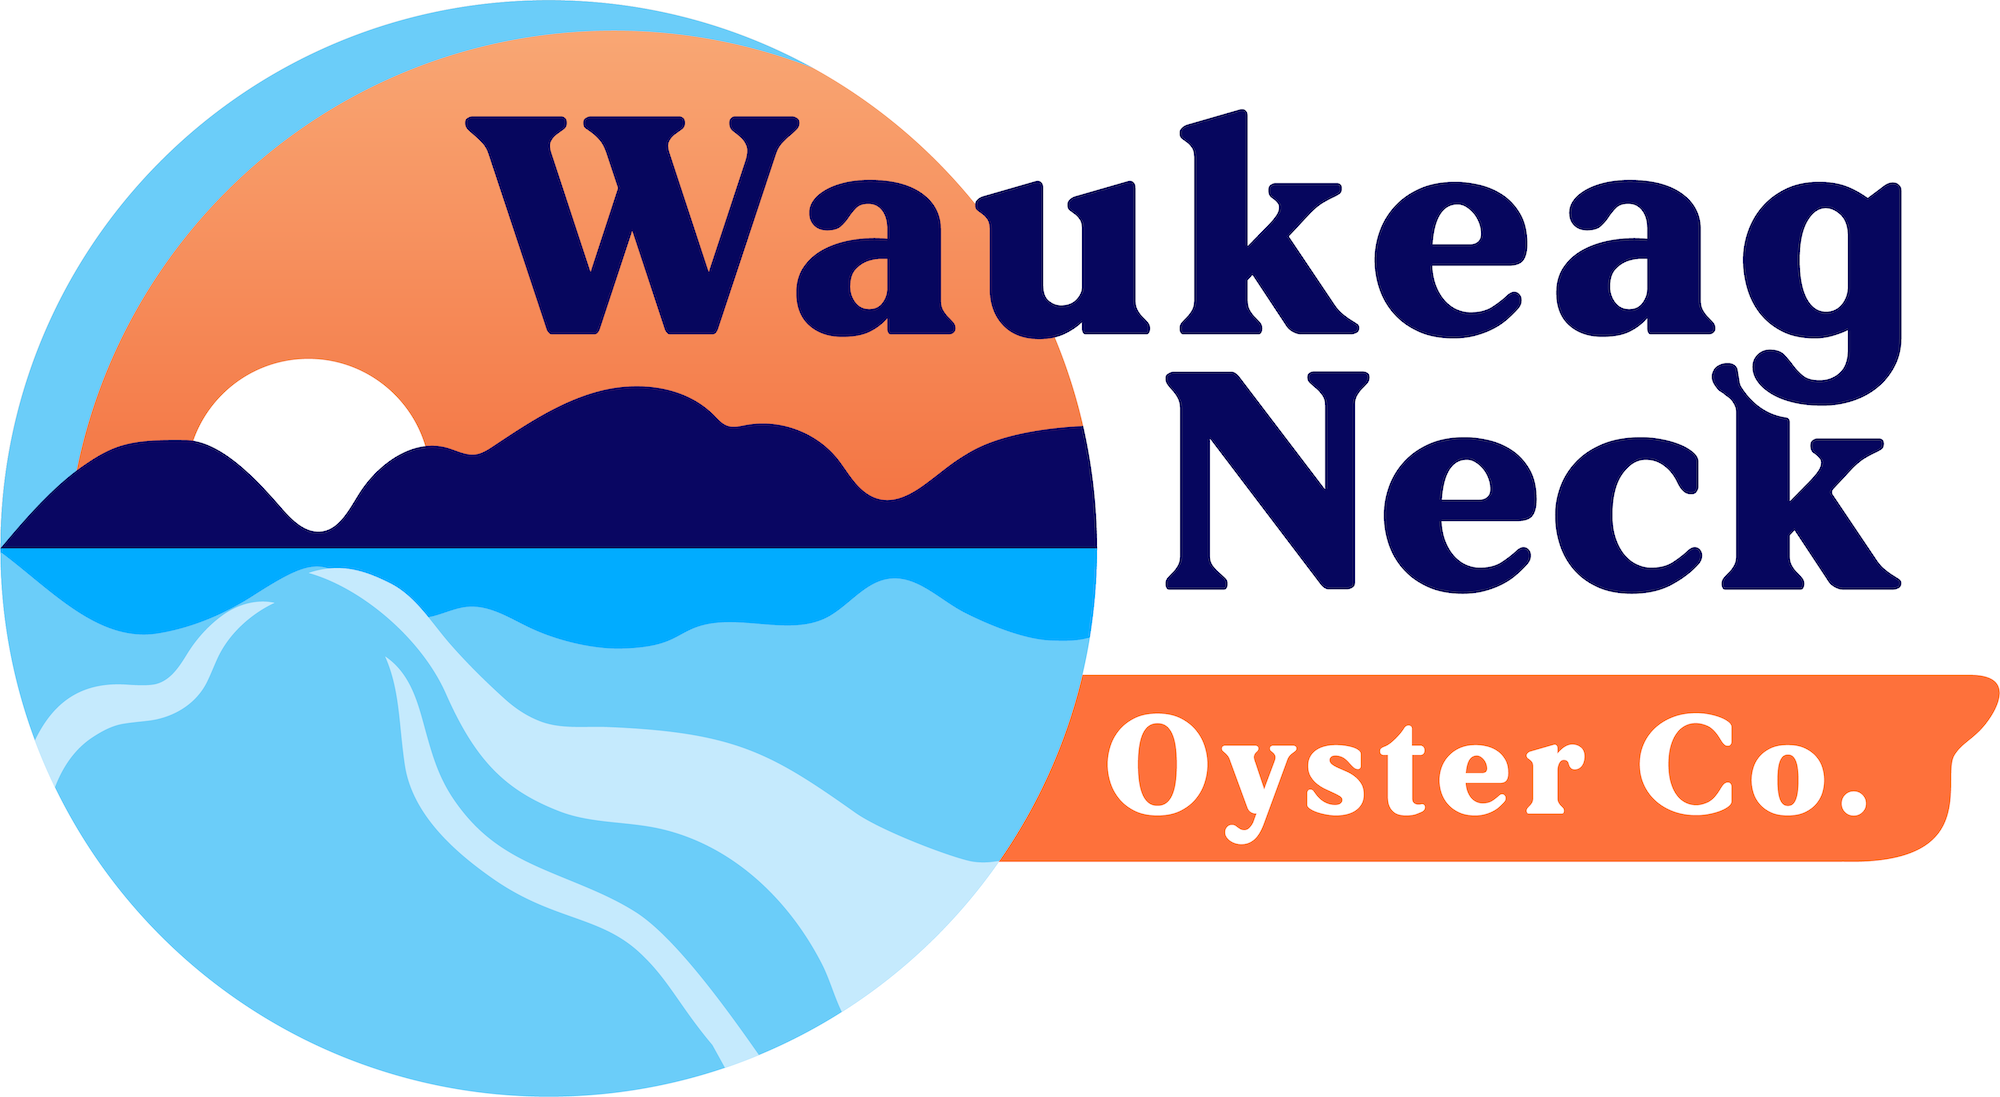 Waukeag Neck Oyster Co.